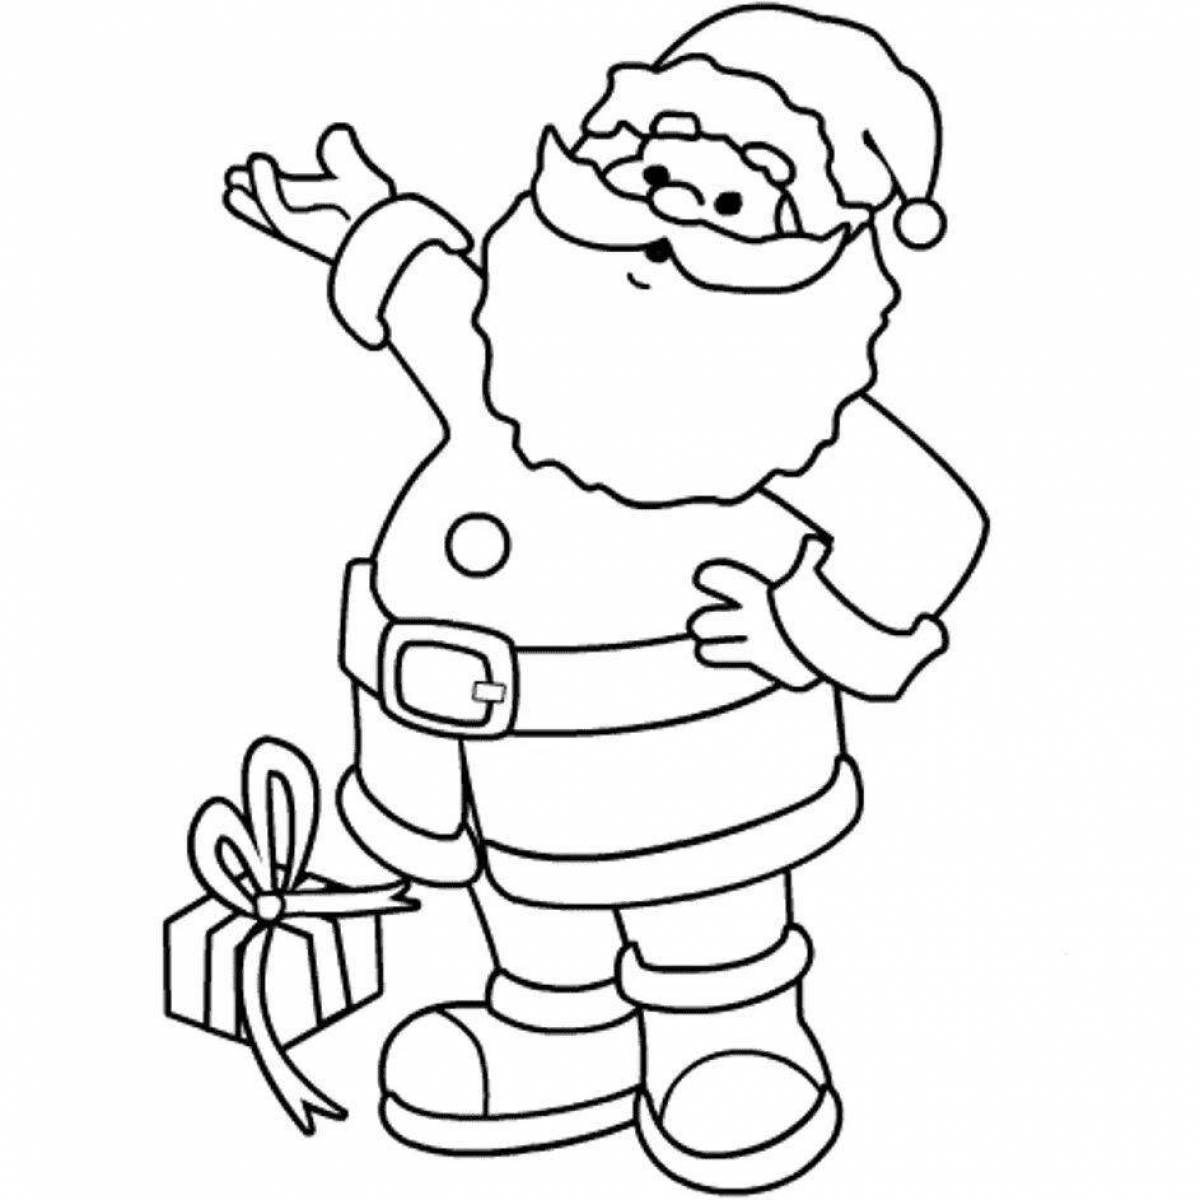 Playful coloring of santa claus for kids